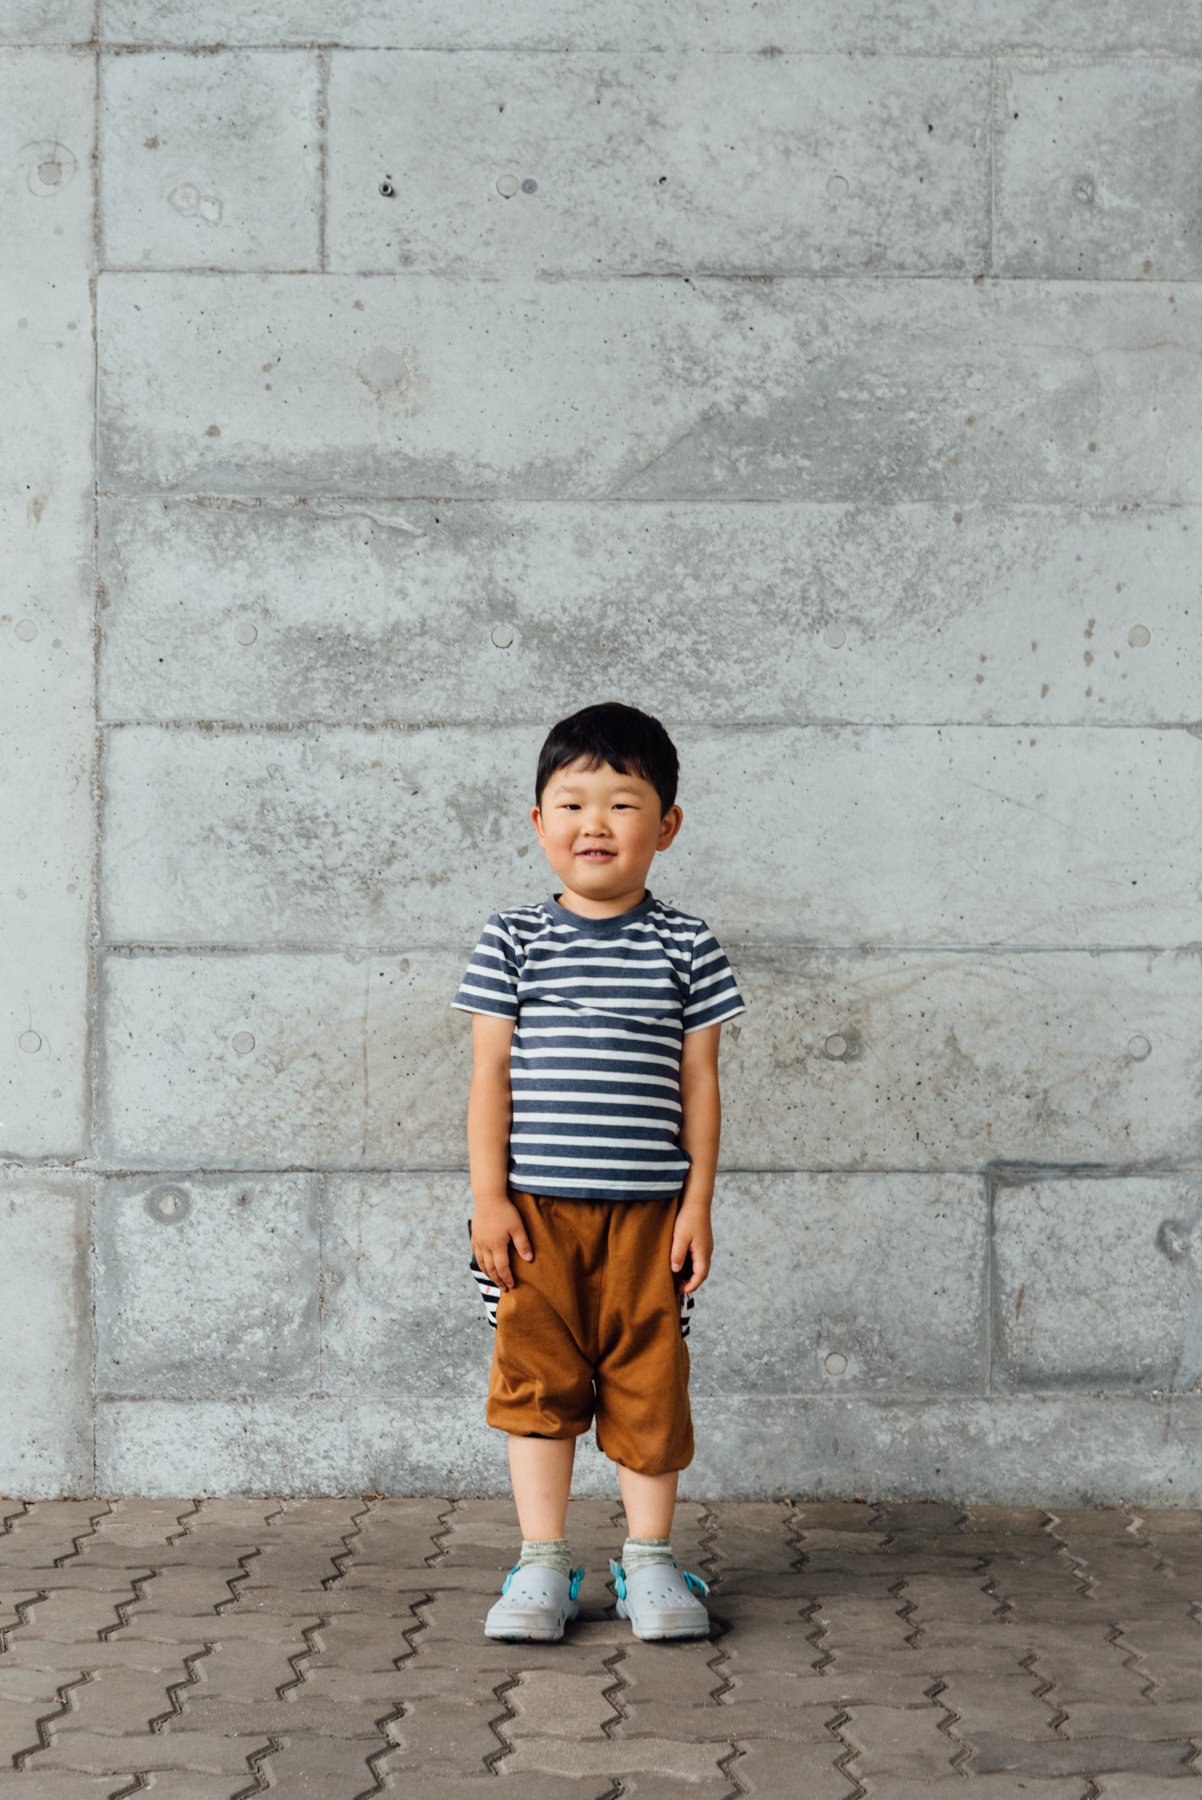  T-shirt:  100% COTTON  Pants:  100% COTTON    Shoes:  RUBBER  “The T-shirt and shoes have became smaller. As for the pants, he says, "they are cute and I don't want to wear them." I will put them in the children's clothing recycle by Sumida Ward, To